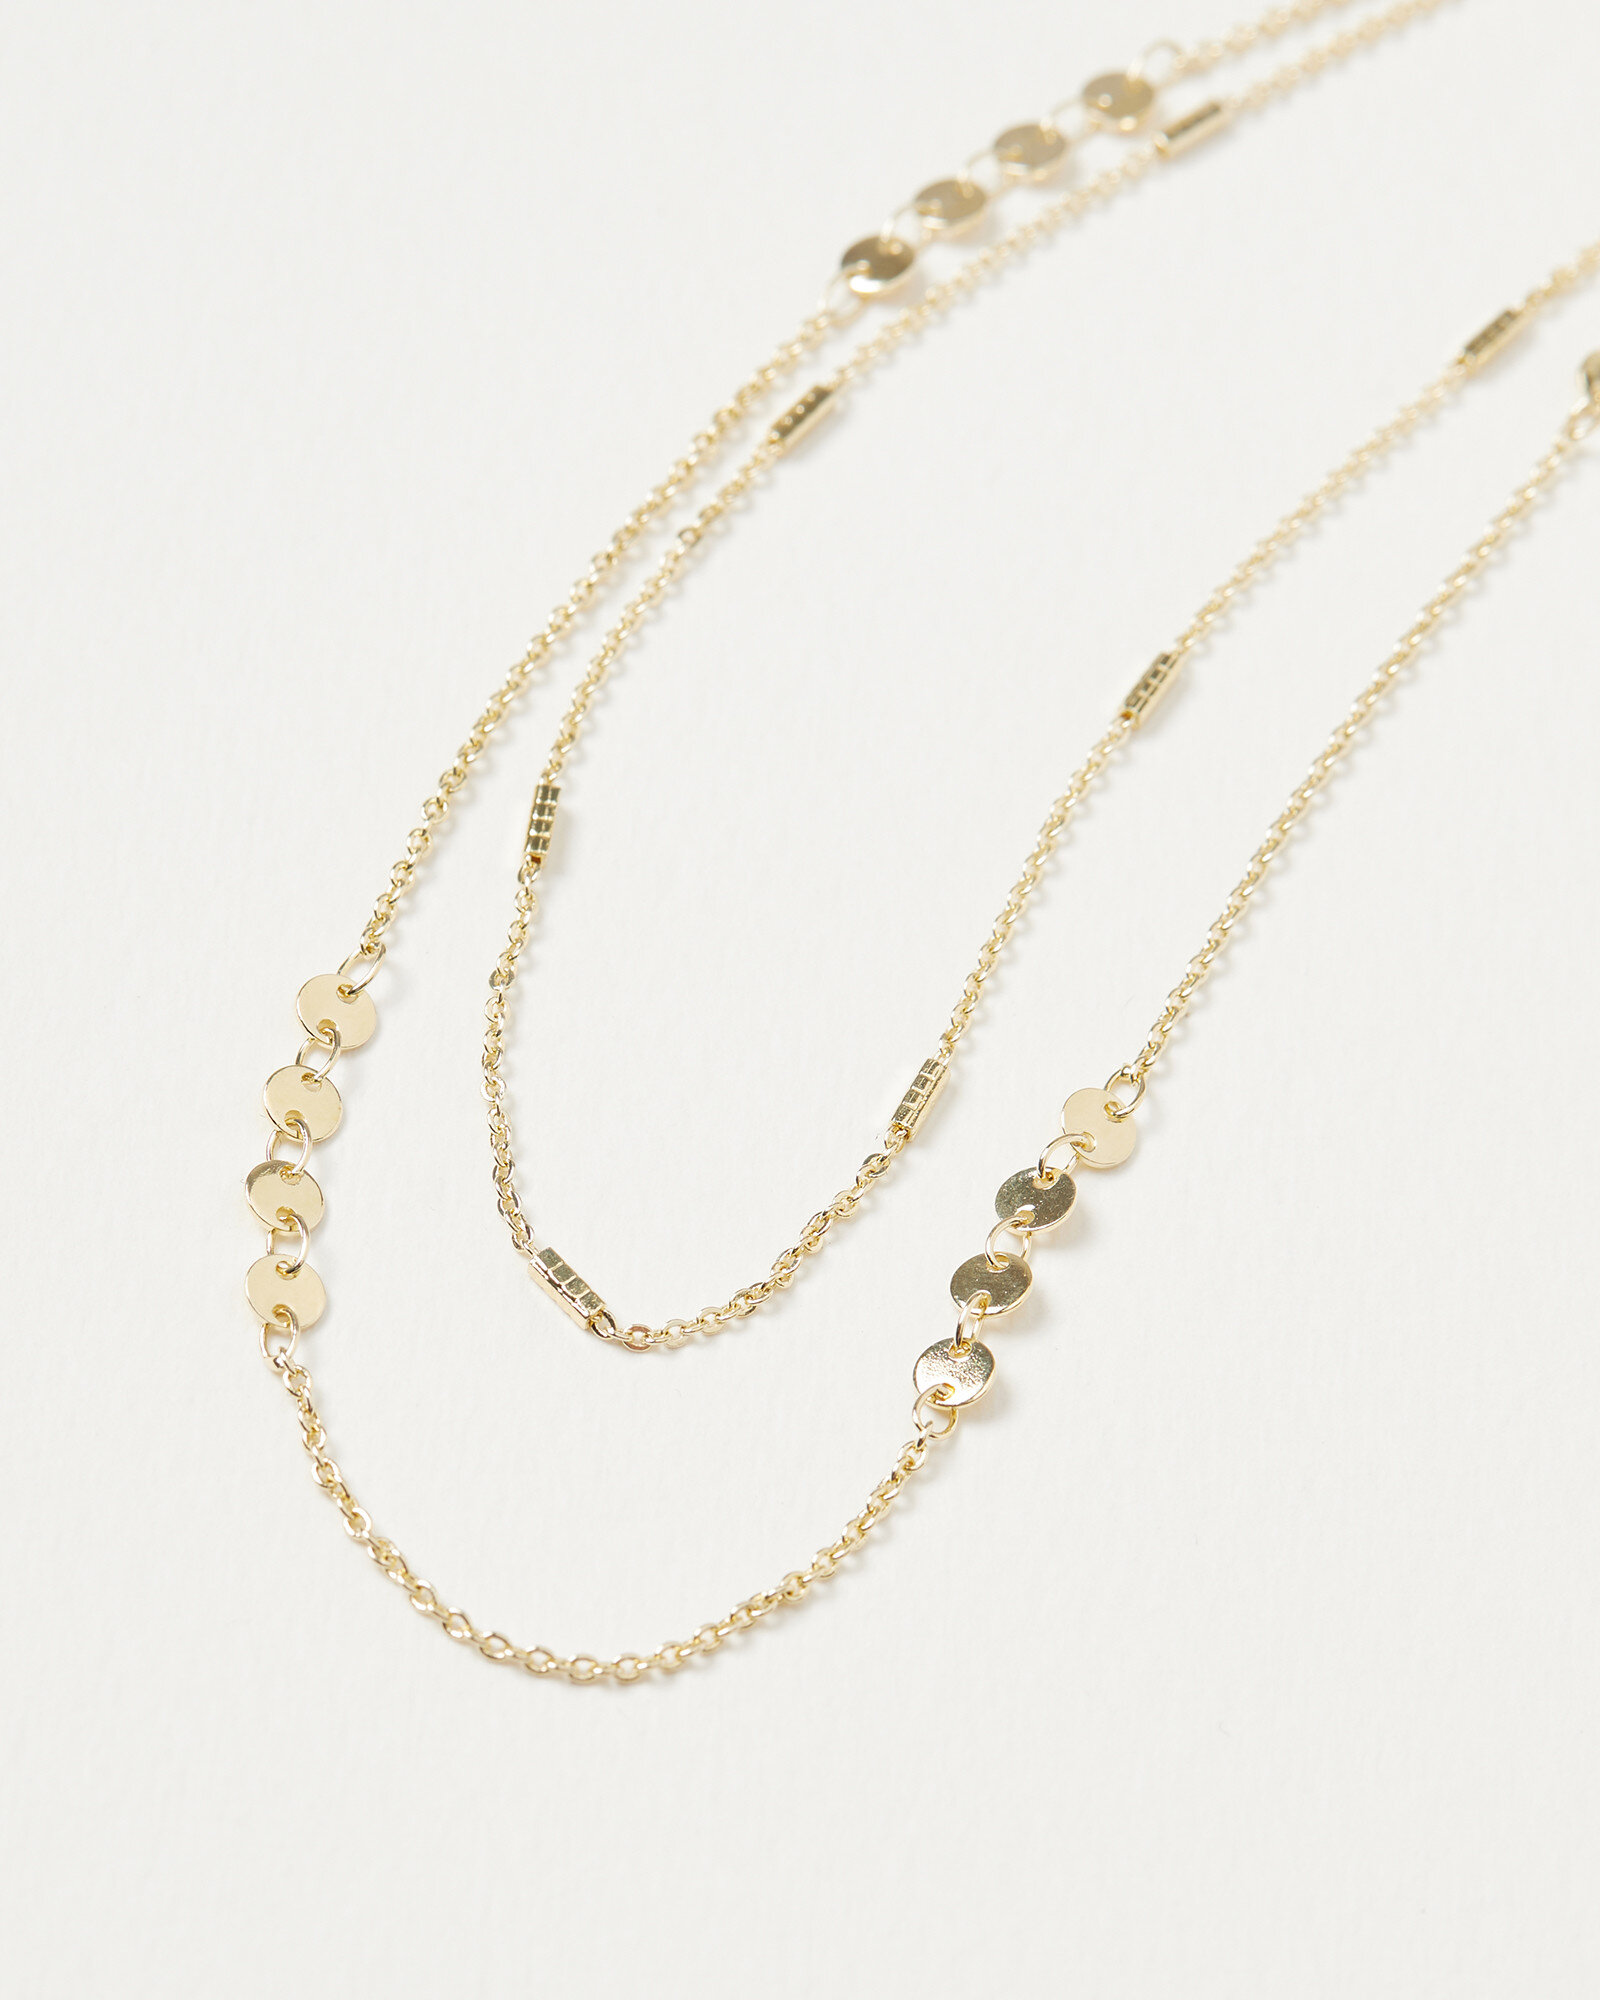 Oliver Bonas Fortune Mixed Chain Layered Necklace £45